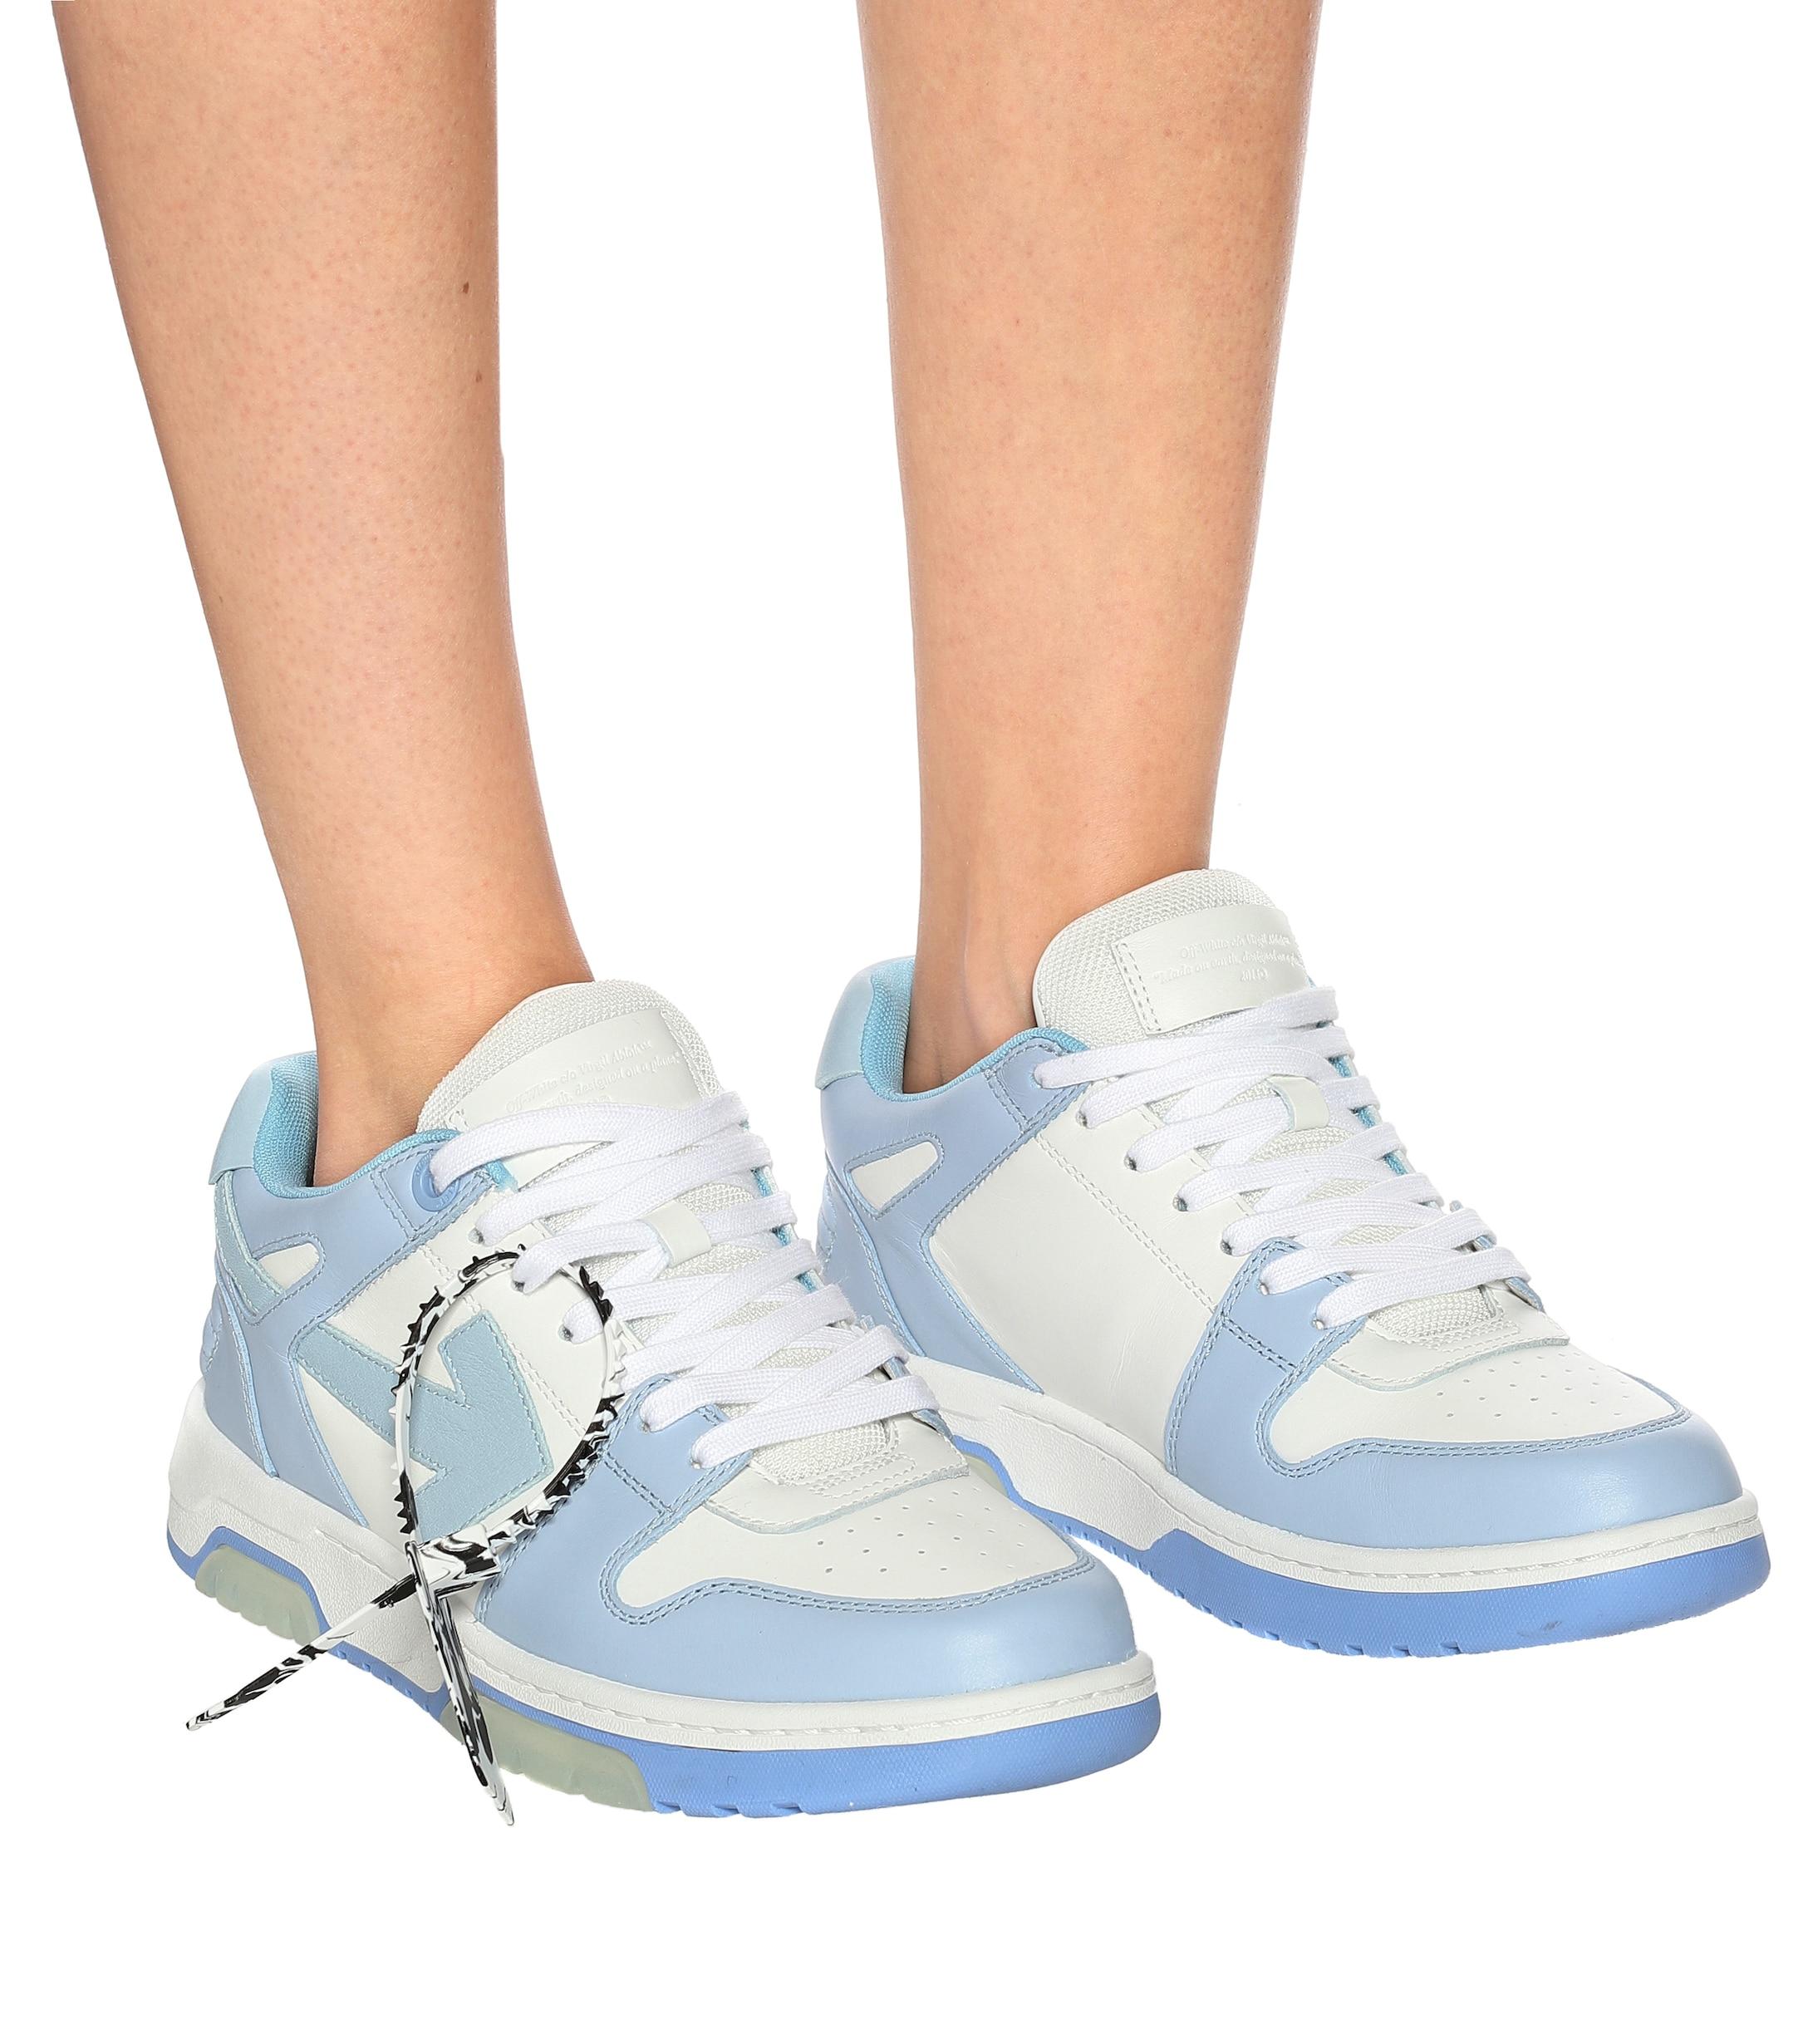 Off-White c/o Virgil Abloh Ooo Out Of Office Leather Sneakers in Blue | Lyst